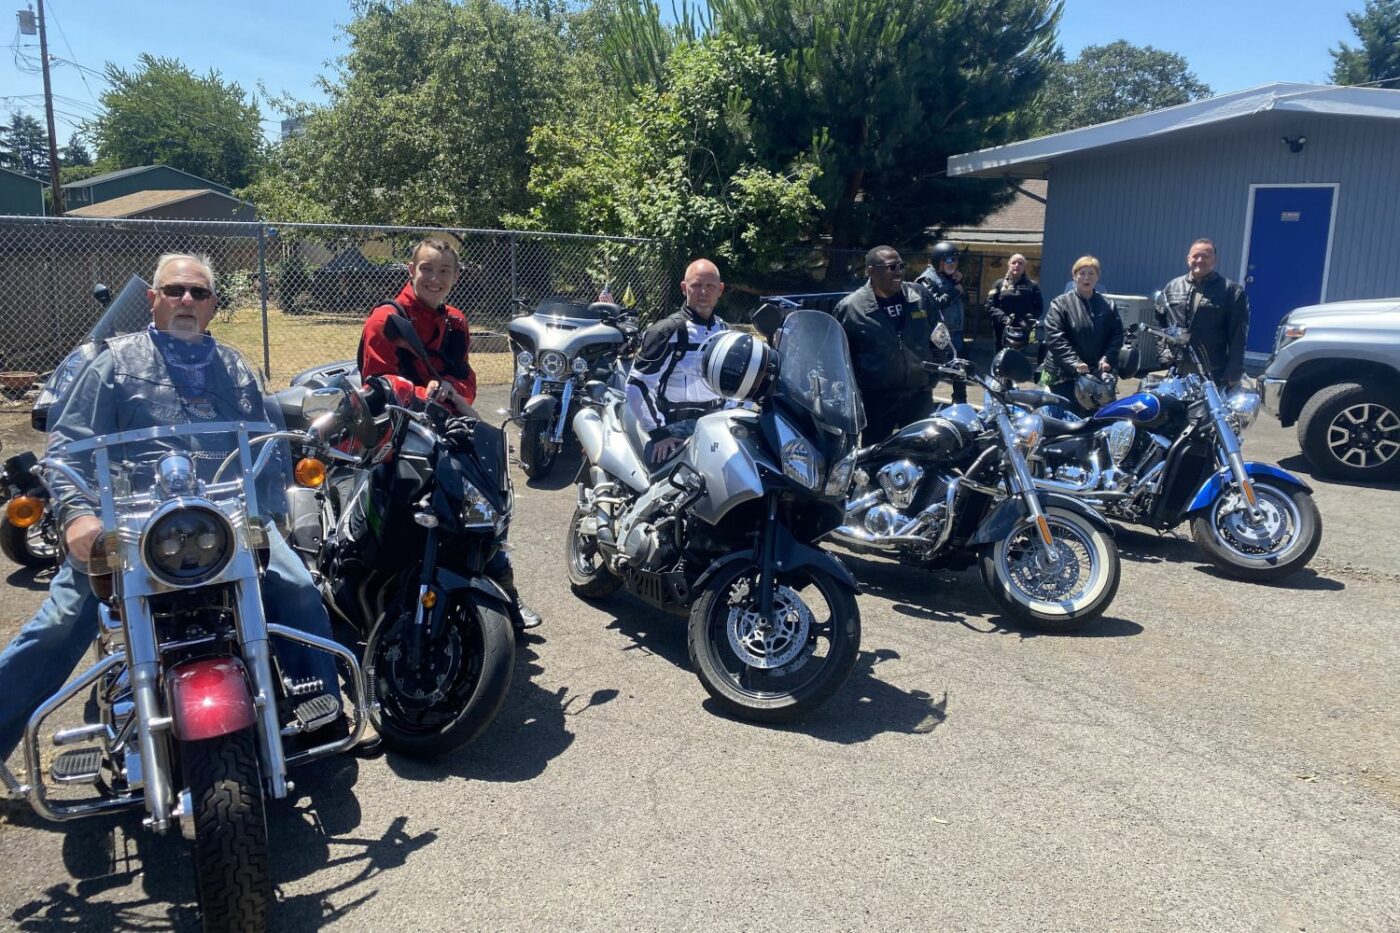 motorcycle riders posing with their bikes in the church parking lot